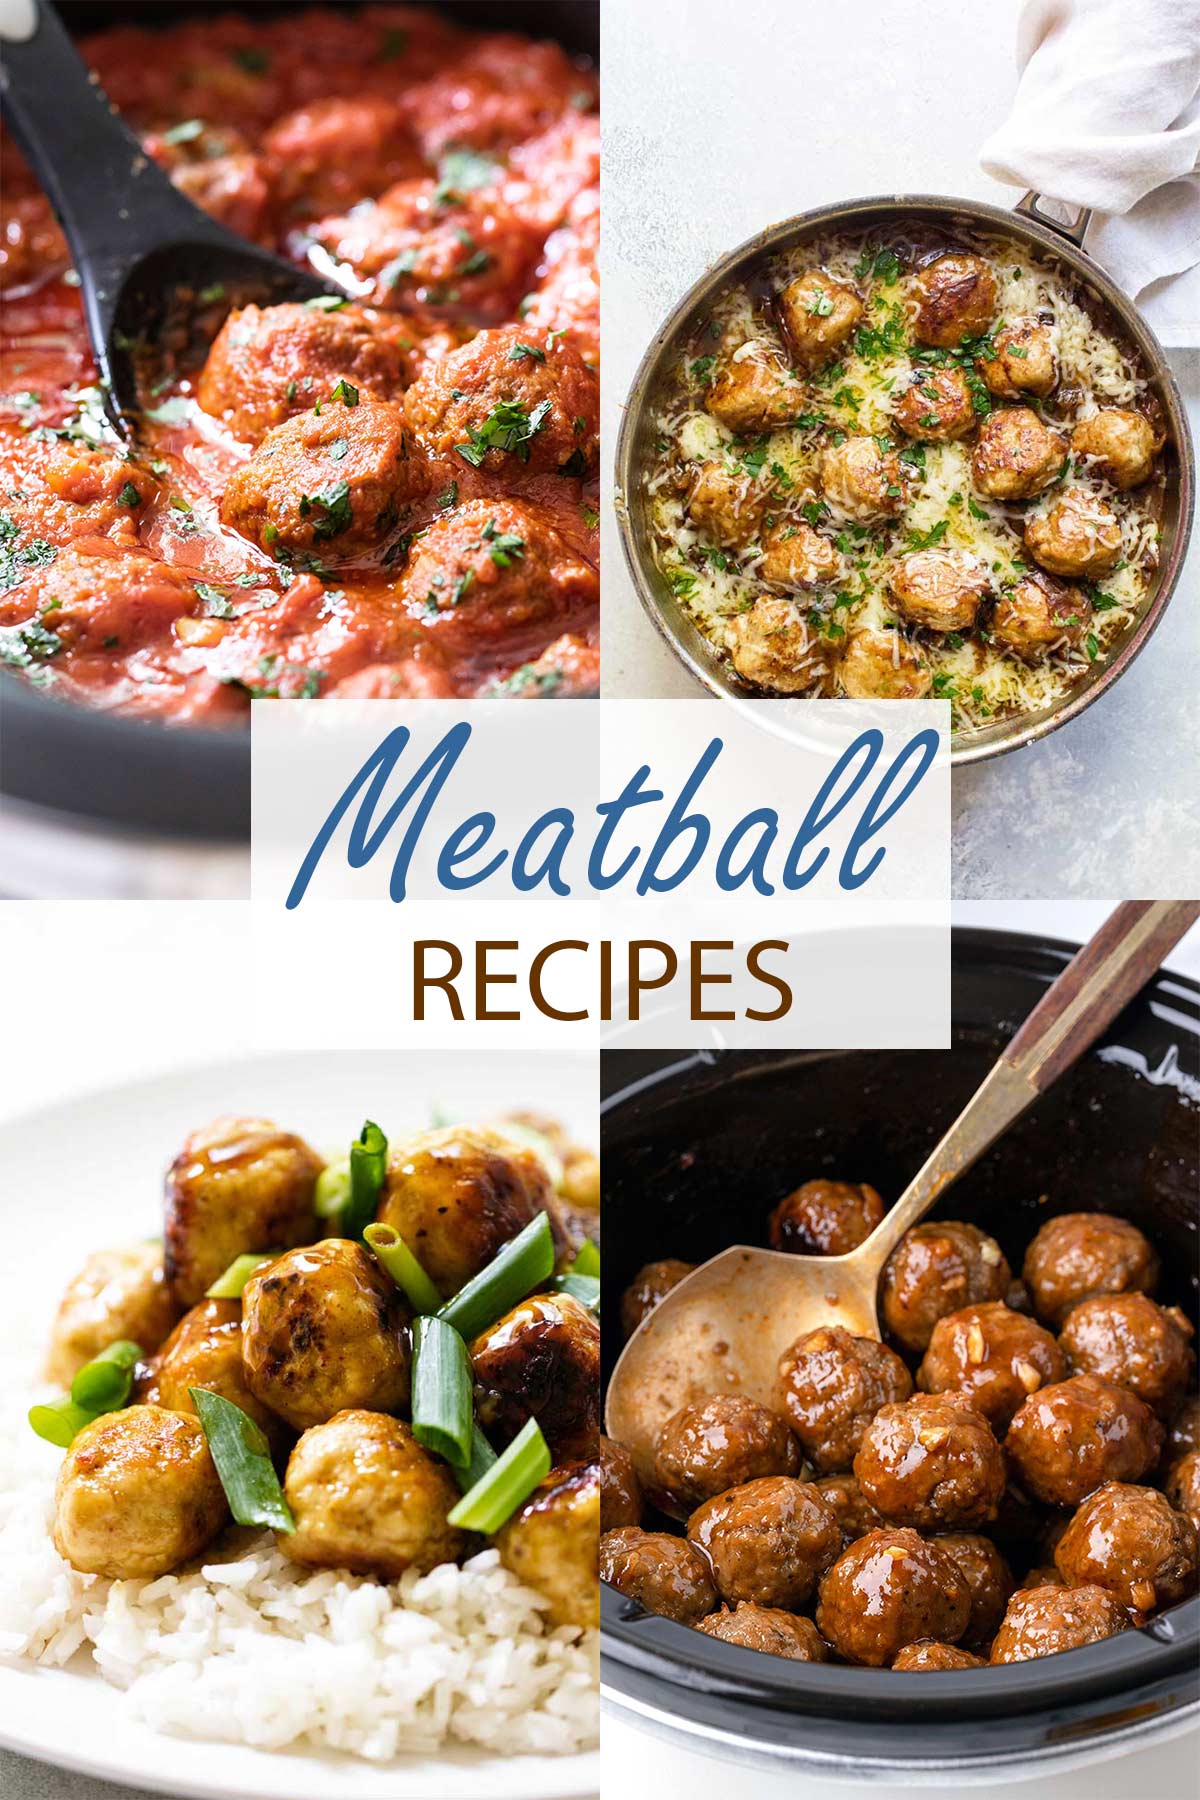 meatball recipes photo collage.